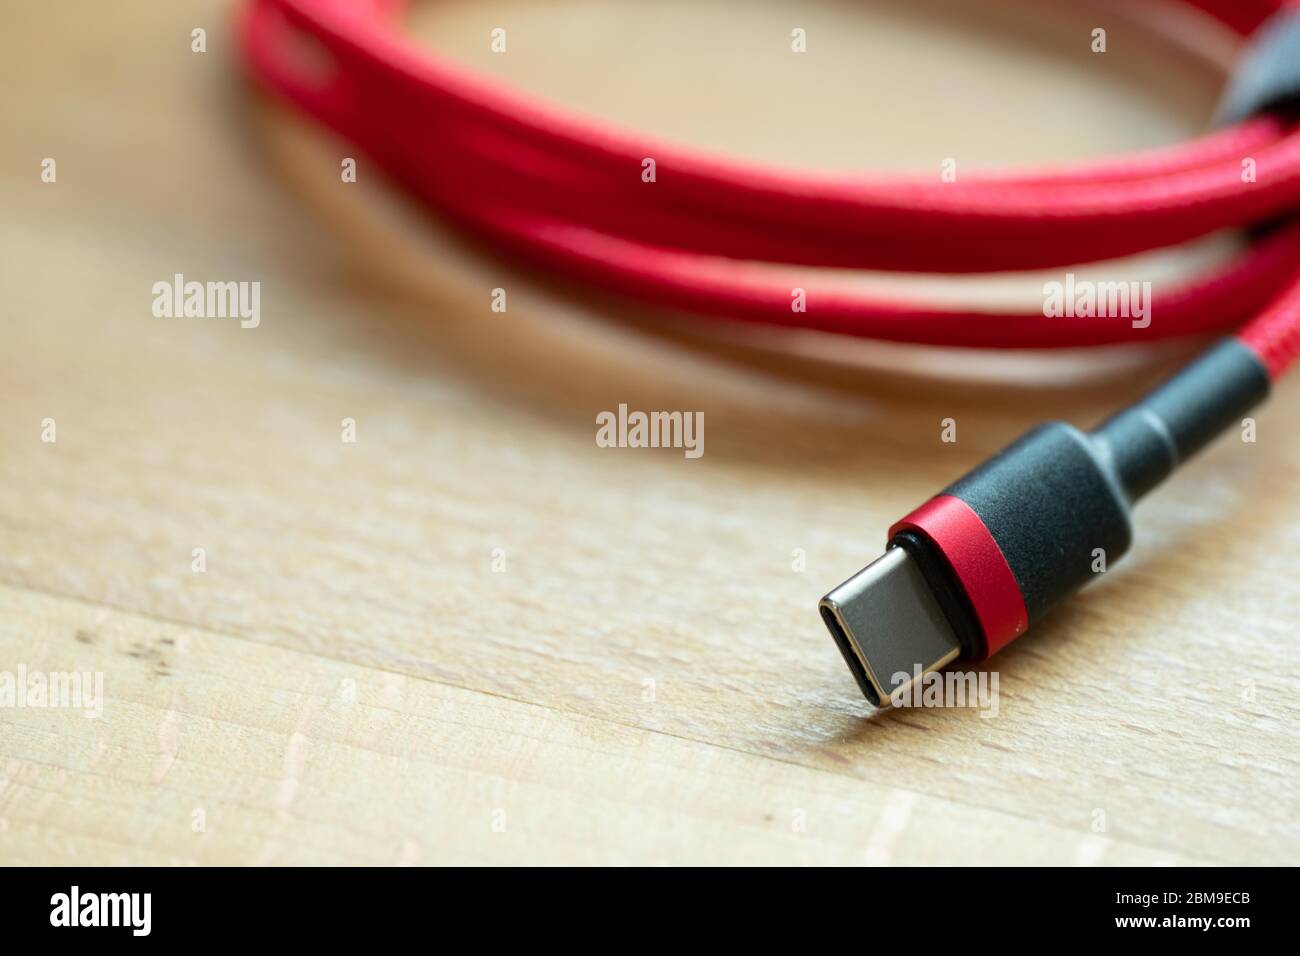 The USB type c is a hi speed data transfer and quick or fast charge battery.It a new connector port of a computer , laptop, or cell phone.A red cable Stock Photo